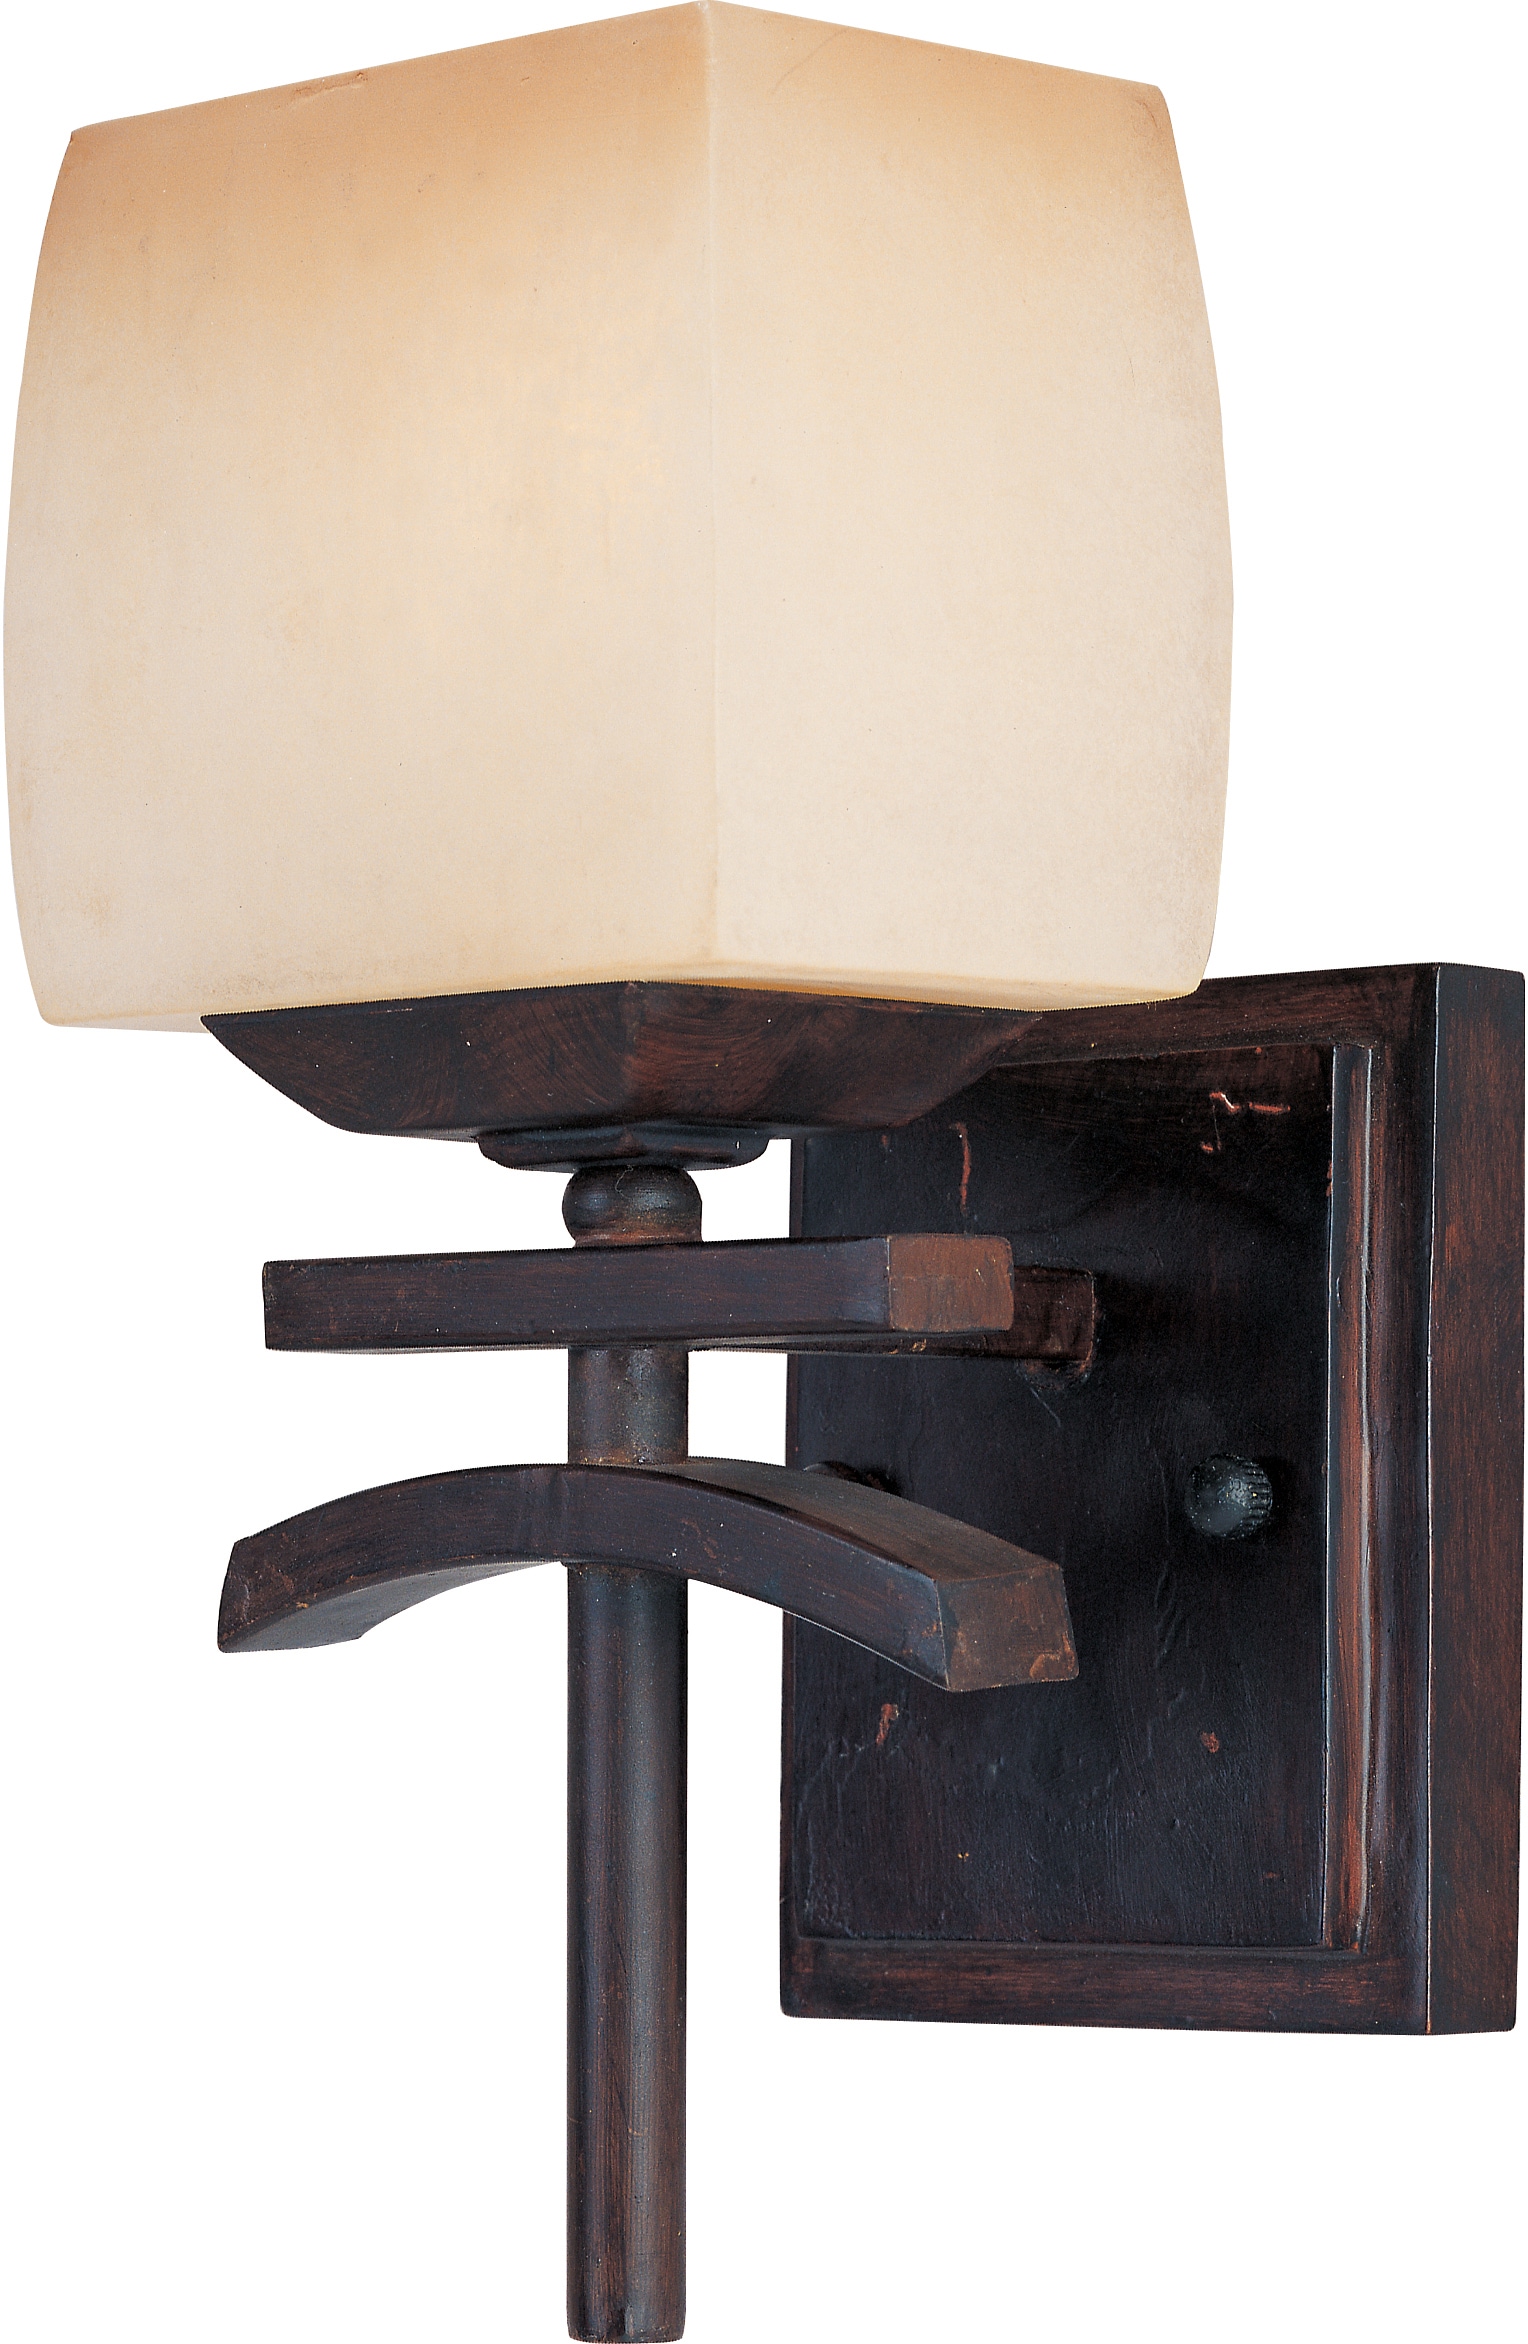 Maxim Lighting Asiana 5.5-in W 1-Light Roasted Chestnut Transitional Wall Sconce